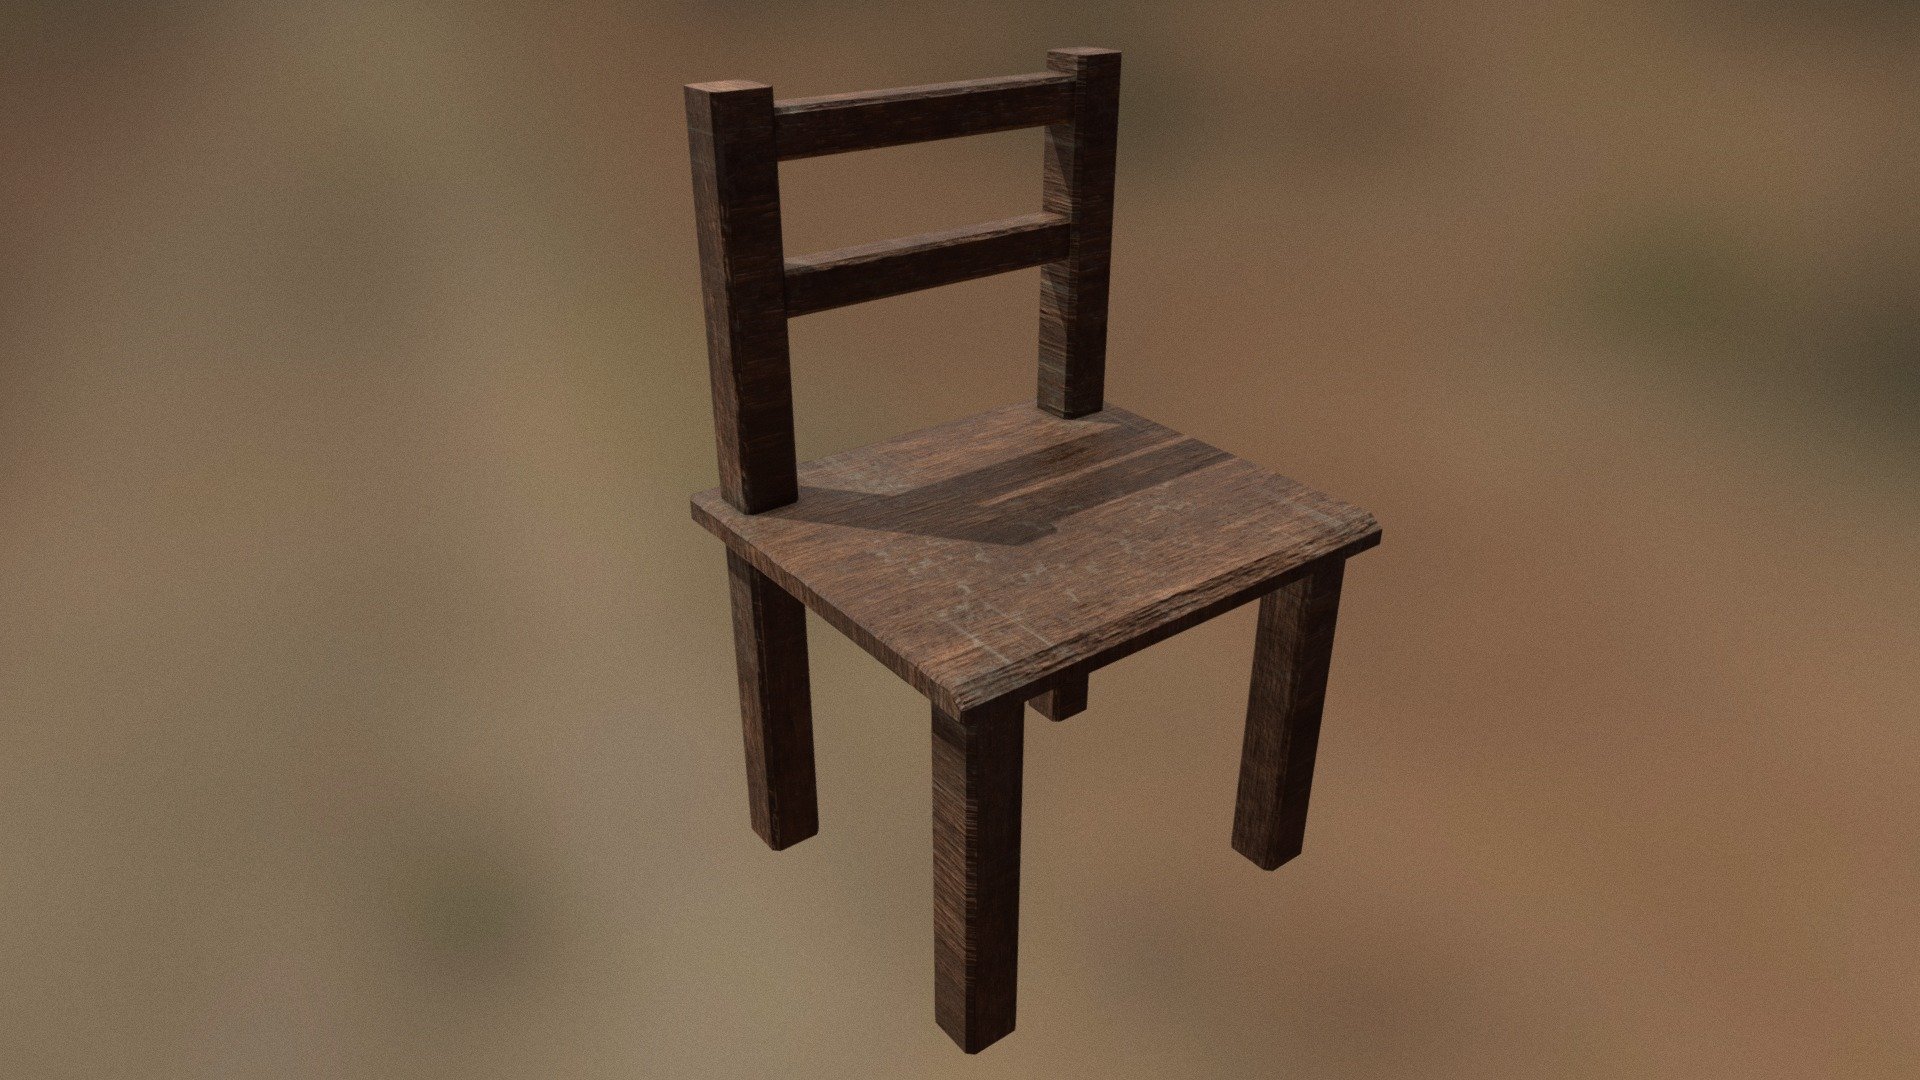 Simple chair / low poly / Free Assets
Simple chair / low poly / Free Assets
Simple chair / low poly / Free Assets - Simple chair / low poly / Free Assets - 3D model by MRX (@visitingskipertv) 3d model